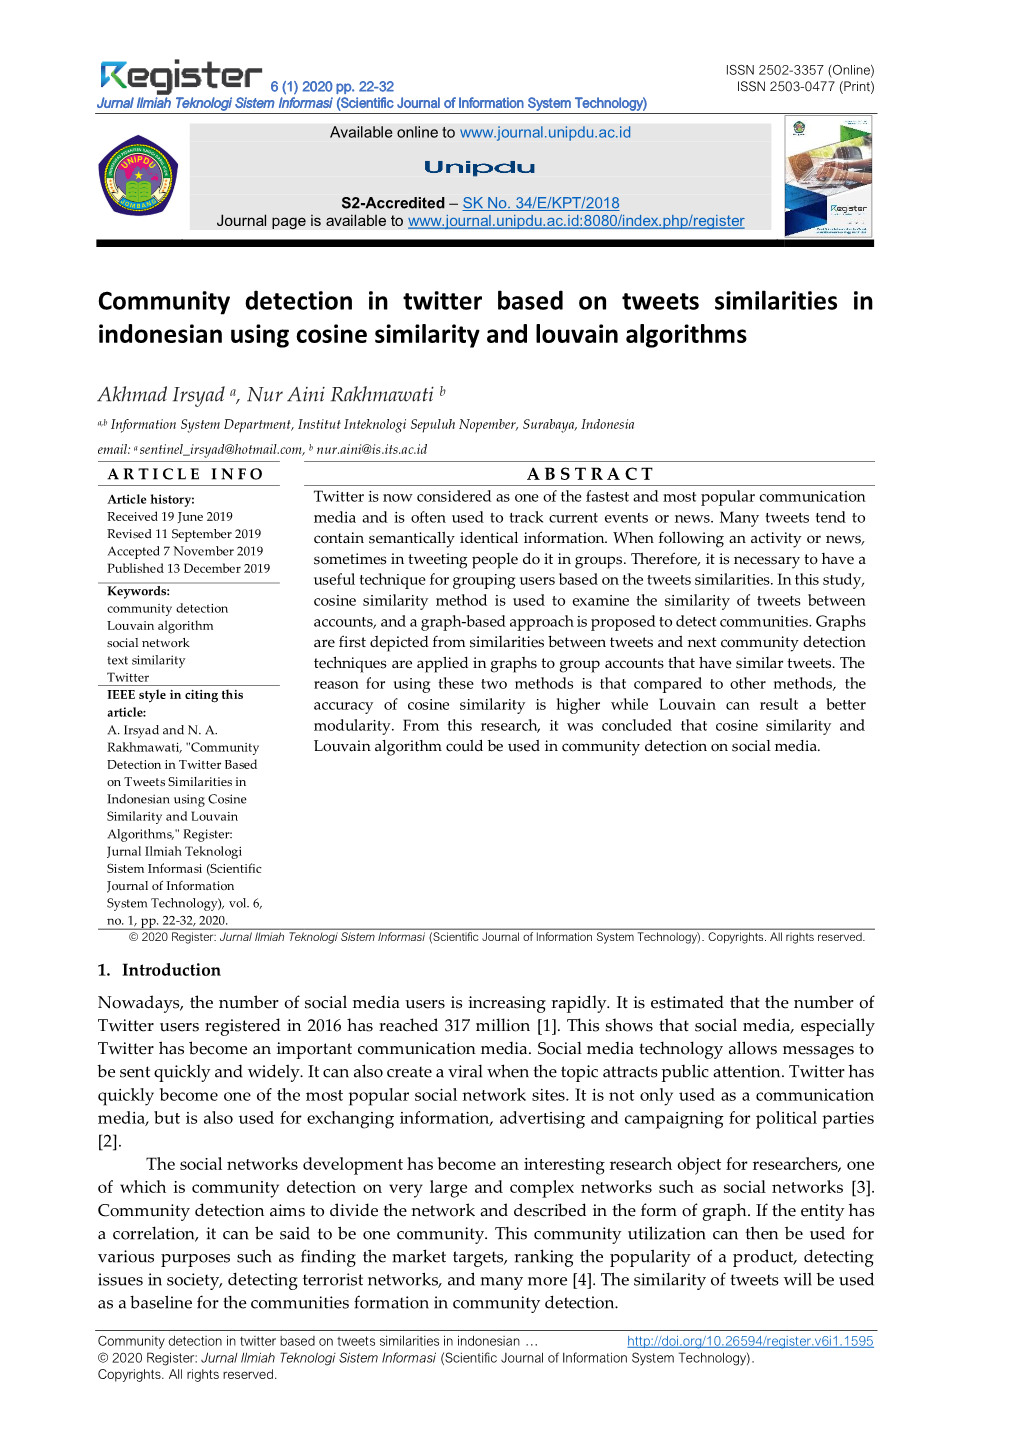 Community Detection in Twitter Based on Tweets Similarities in Indonesian Using Cosine Similarity and Louvain Algorithms